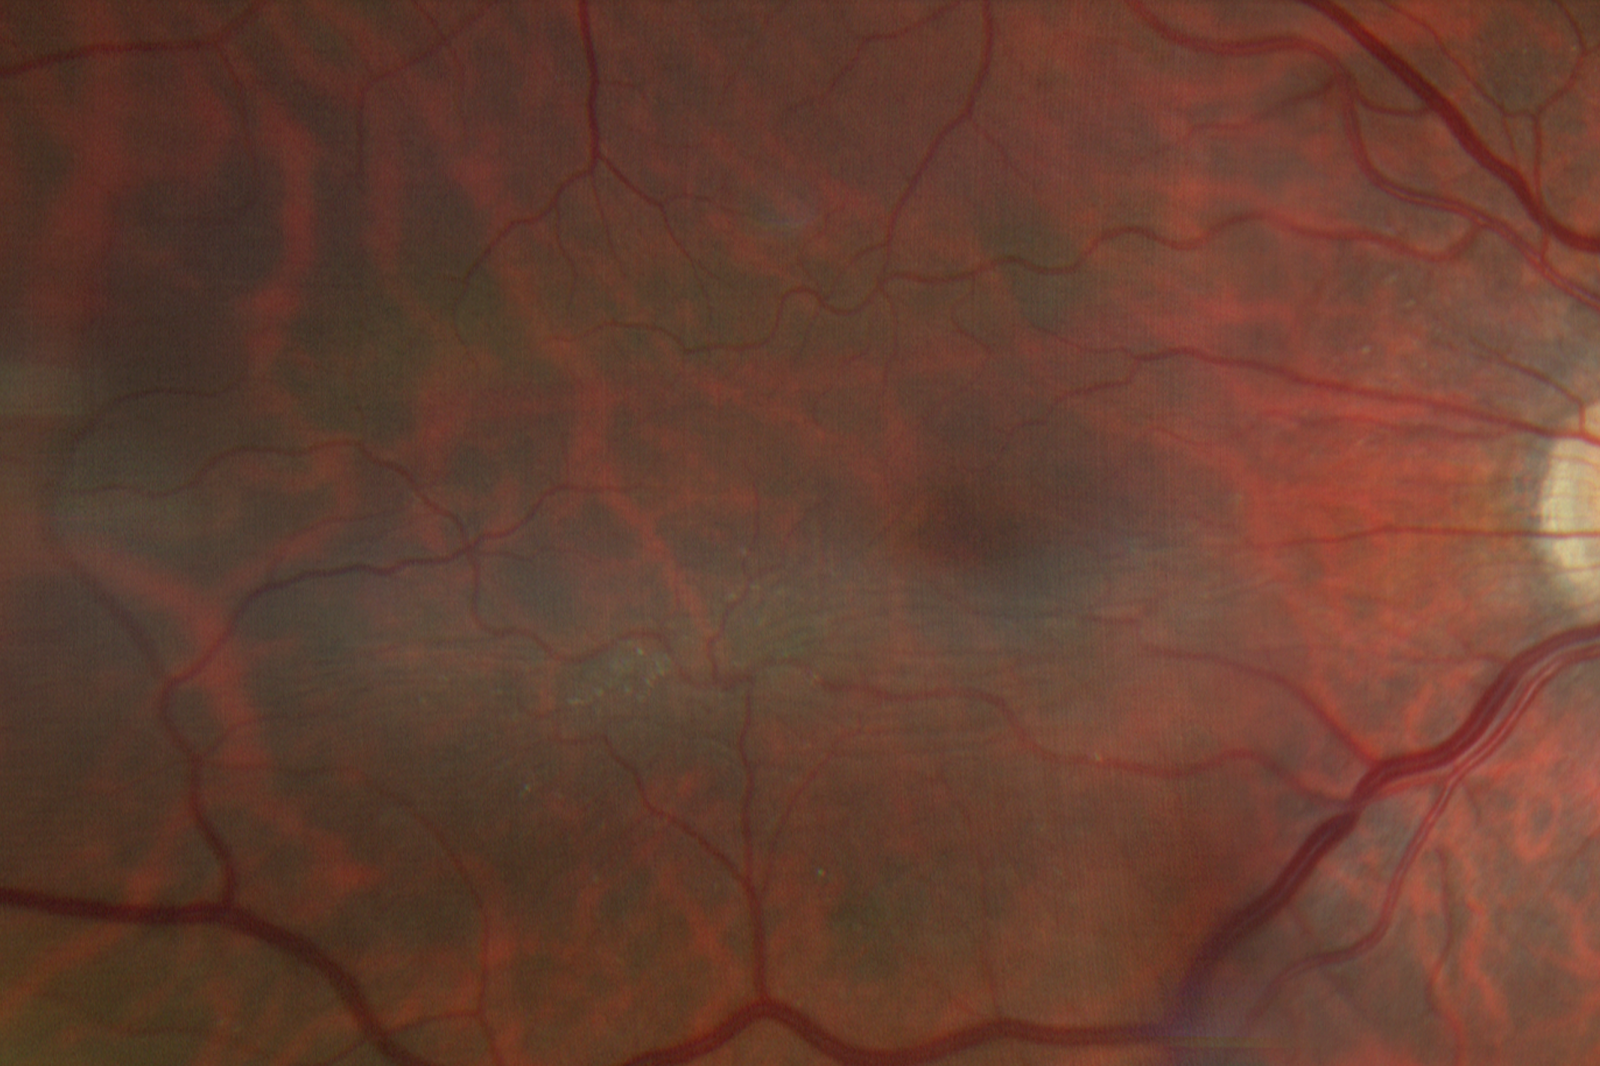 Upon zooming in on the patient’s macula in the right eye an epiretinal membrane/ macular pucker is seen.